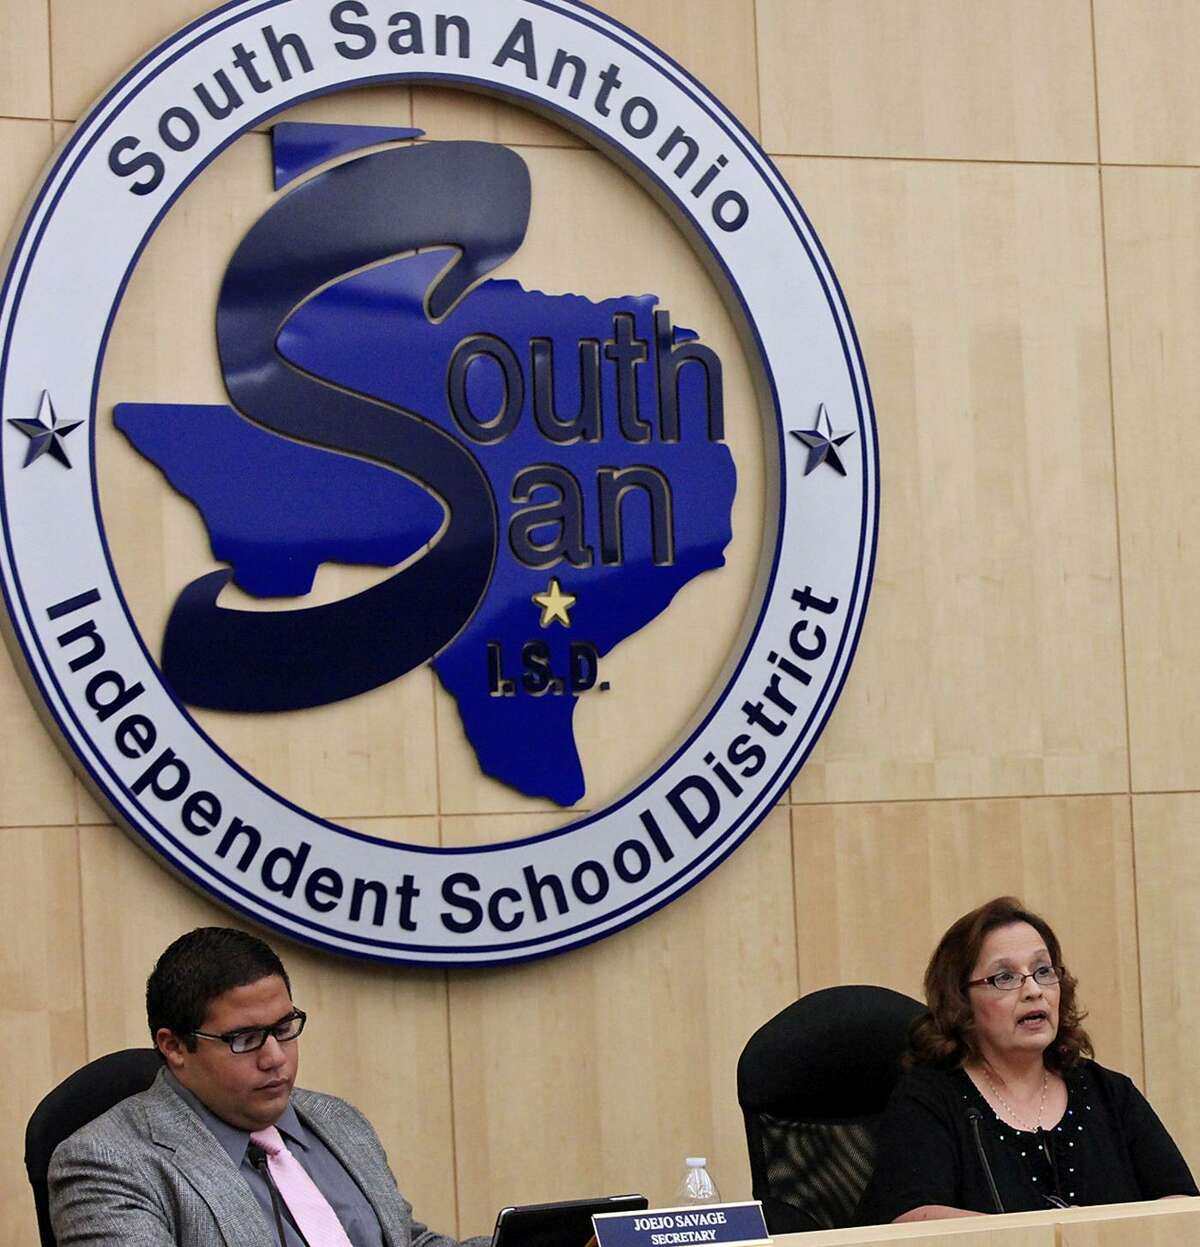 South San Antonio Independent School District board members attend a 2013 meeting at district headquarters. All but one member of the often-dysfunctional board have been replaced since 2014, and the district is no longer under state supervision.